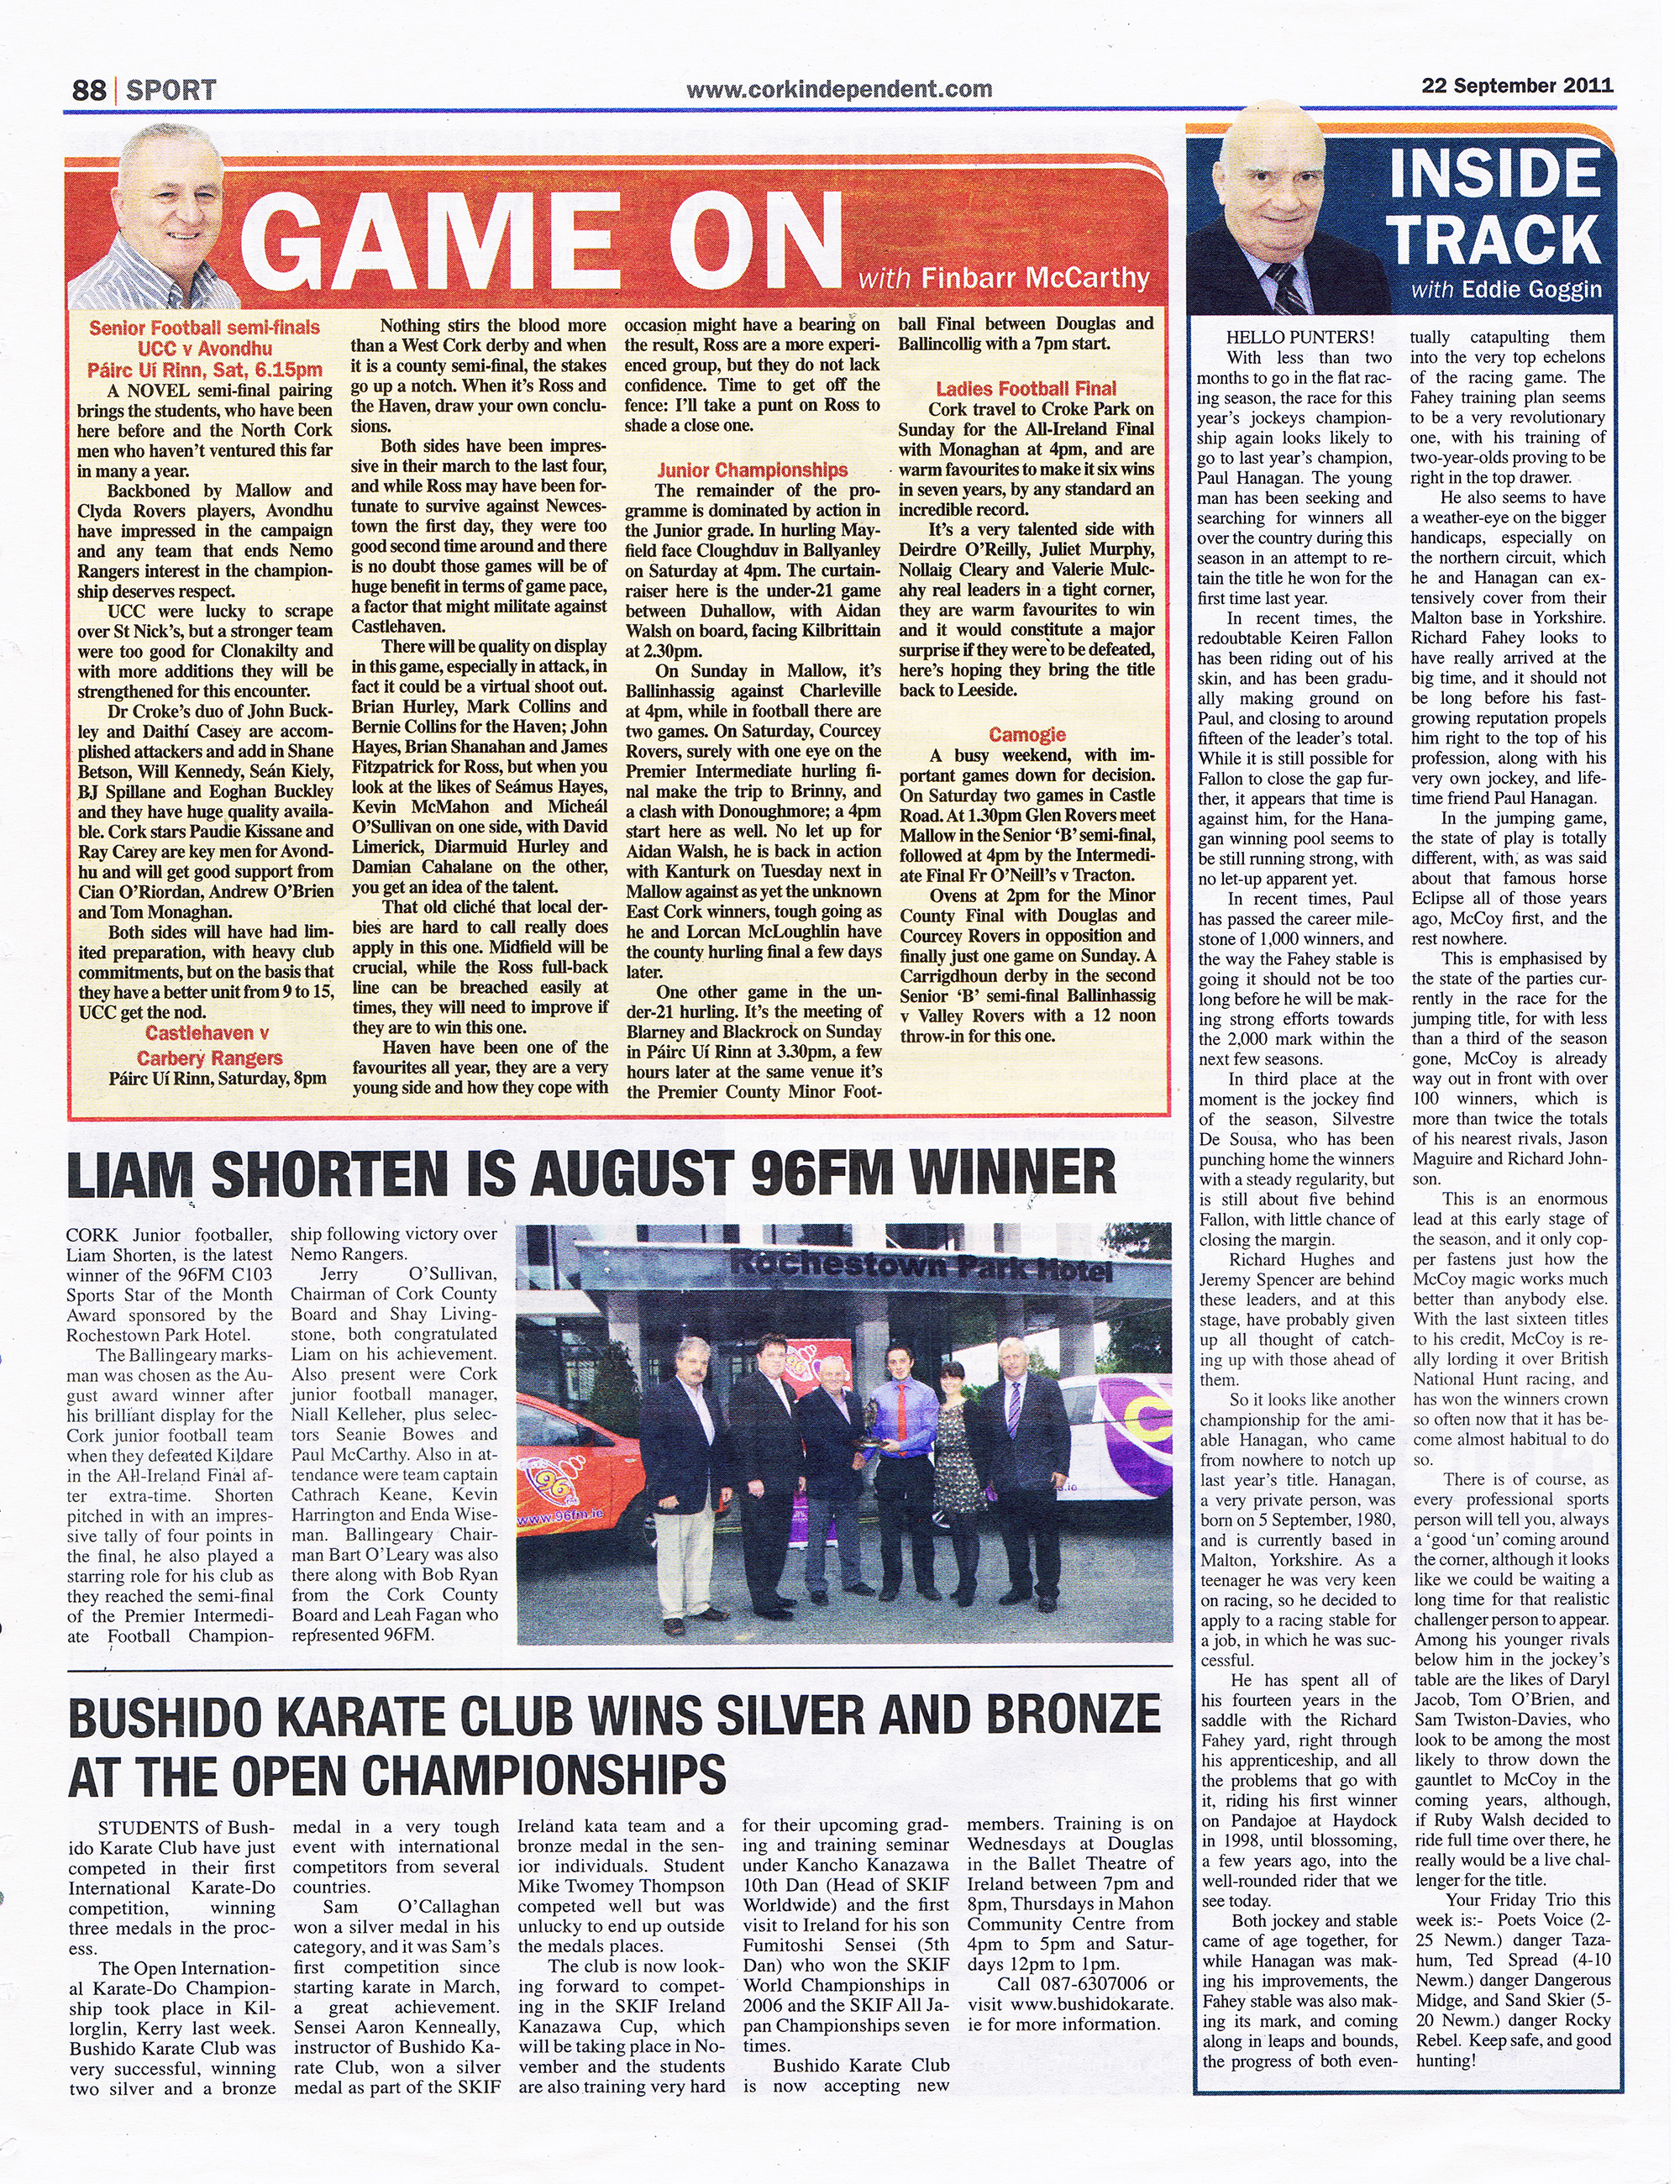 Cork Independant Feature - Bushido Karate Club Wins Silver and Bronze at the Open Championships